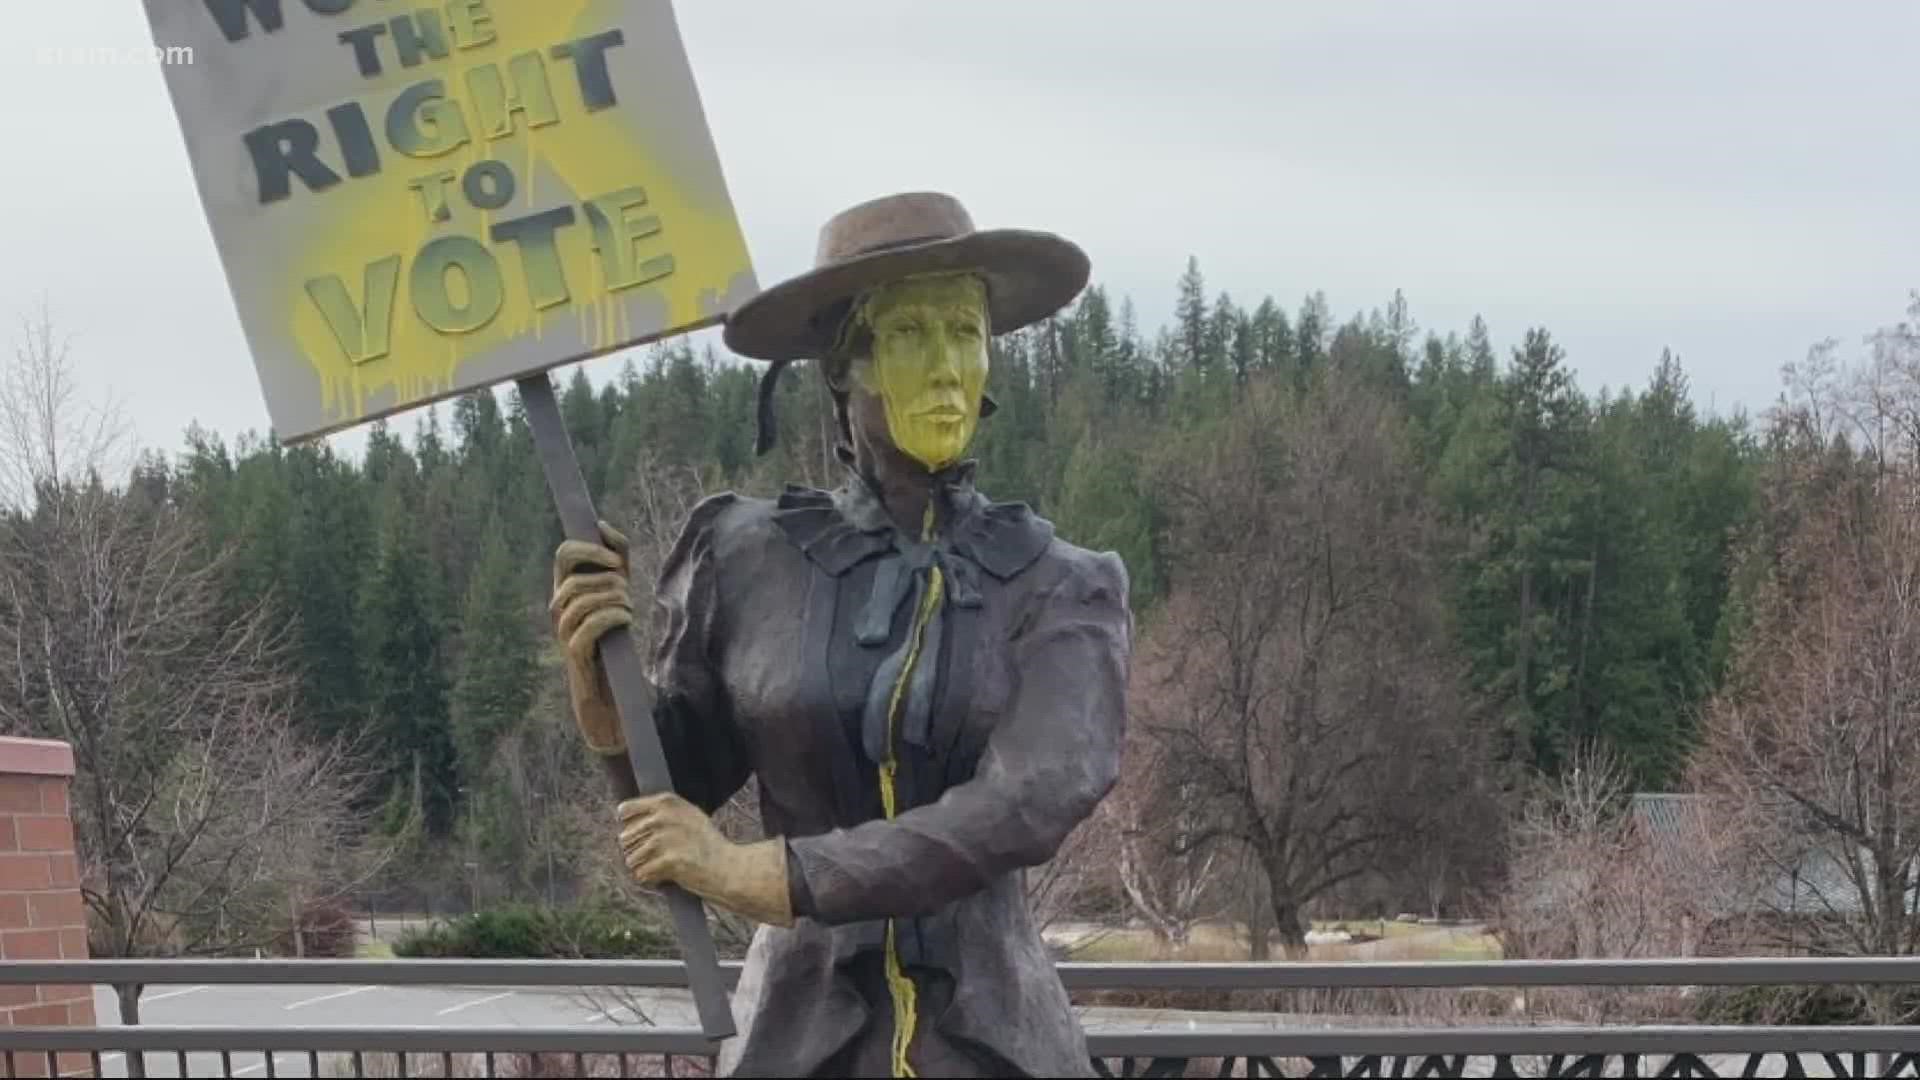 The statue depicting a suffragist woman was vandalized Saturday morning. The statue celebrated 100 years since the ratification of the 19th Amendment.